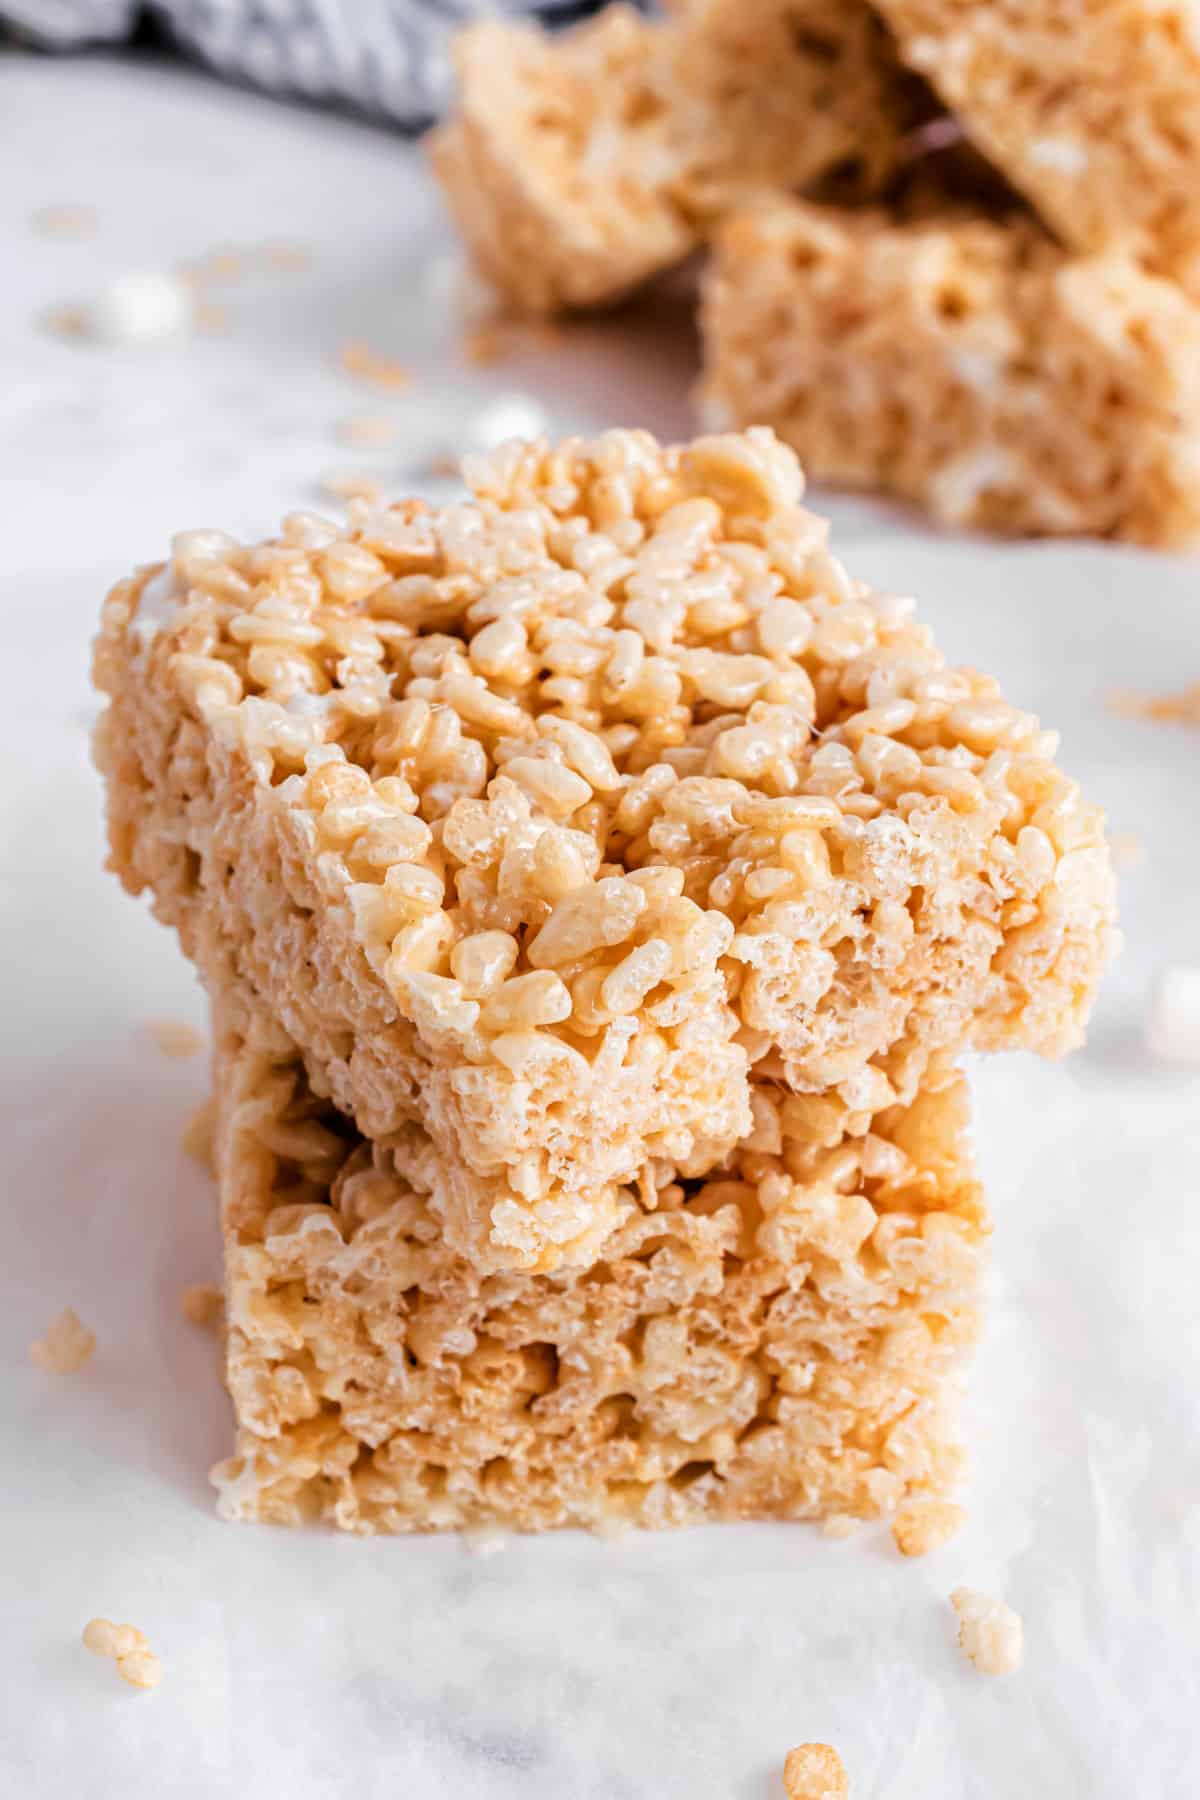 Stack of two rice krispie treats made with browned butter.